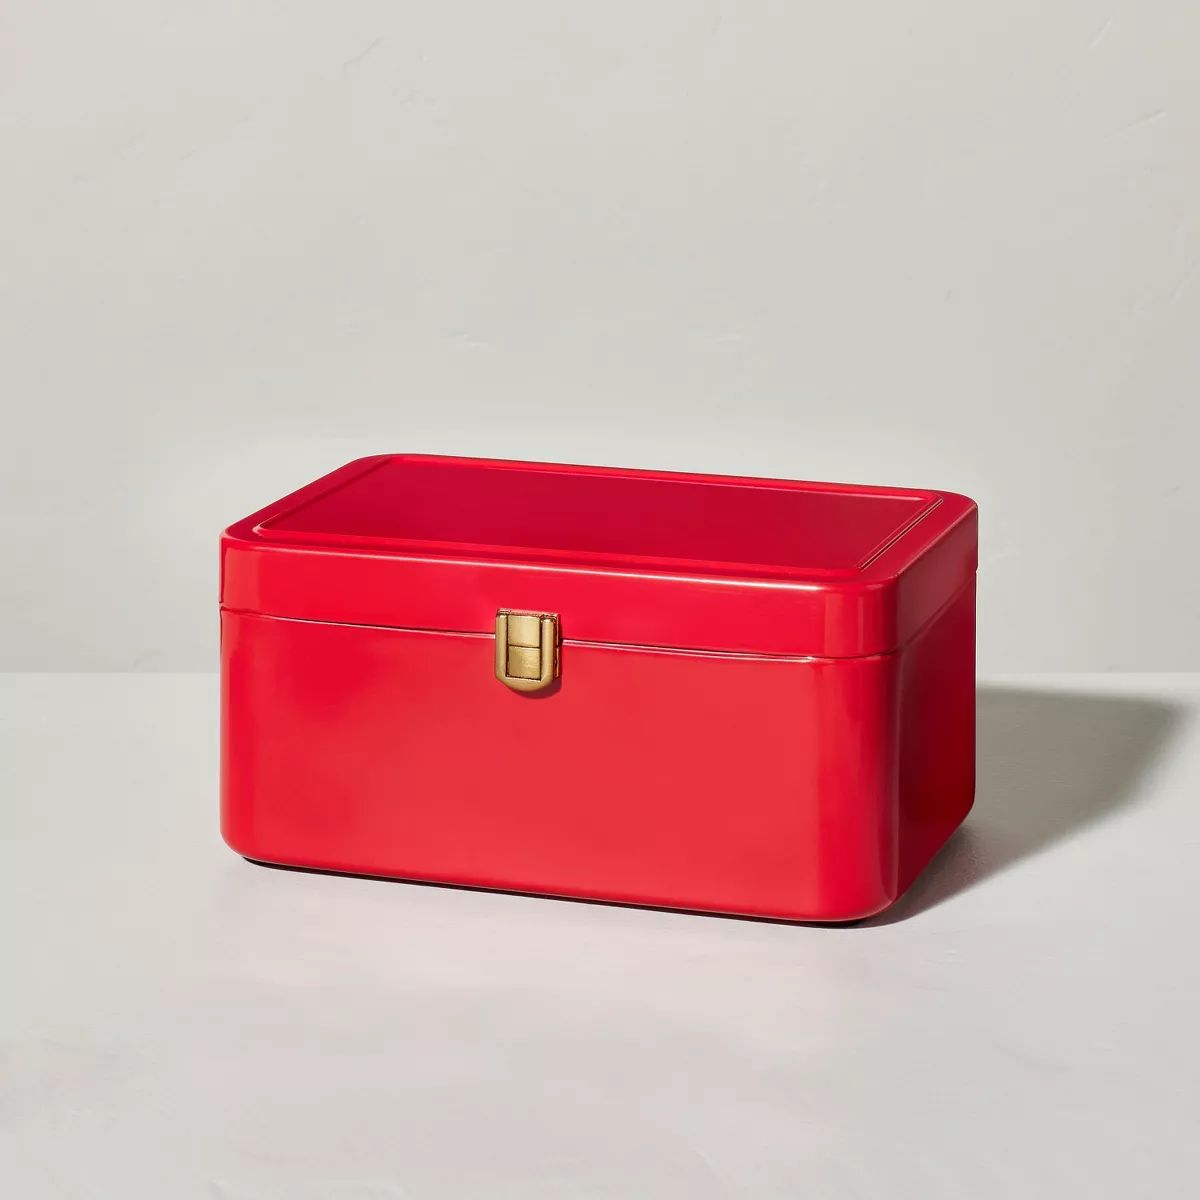 Metal Latch Box Red/Gold - Hearth & Hand™ with Magnolia | Target